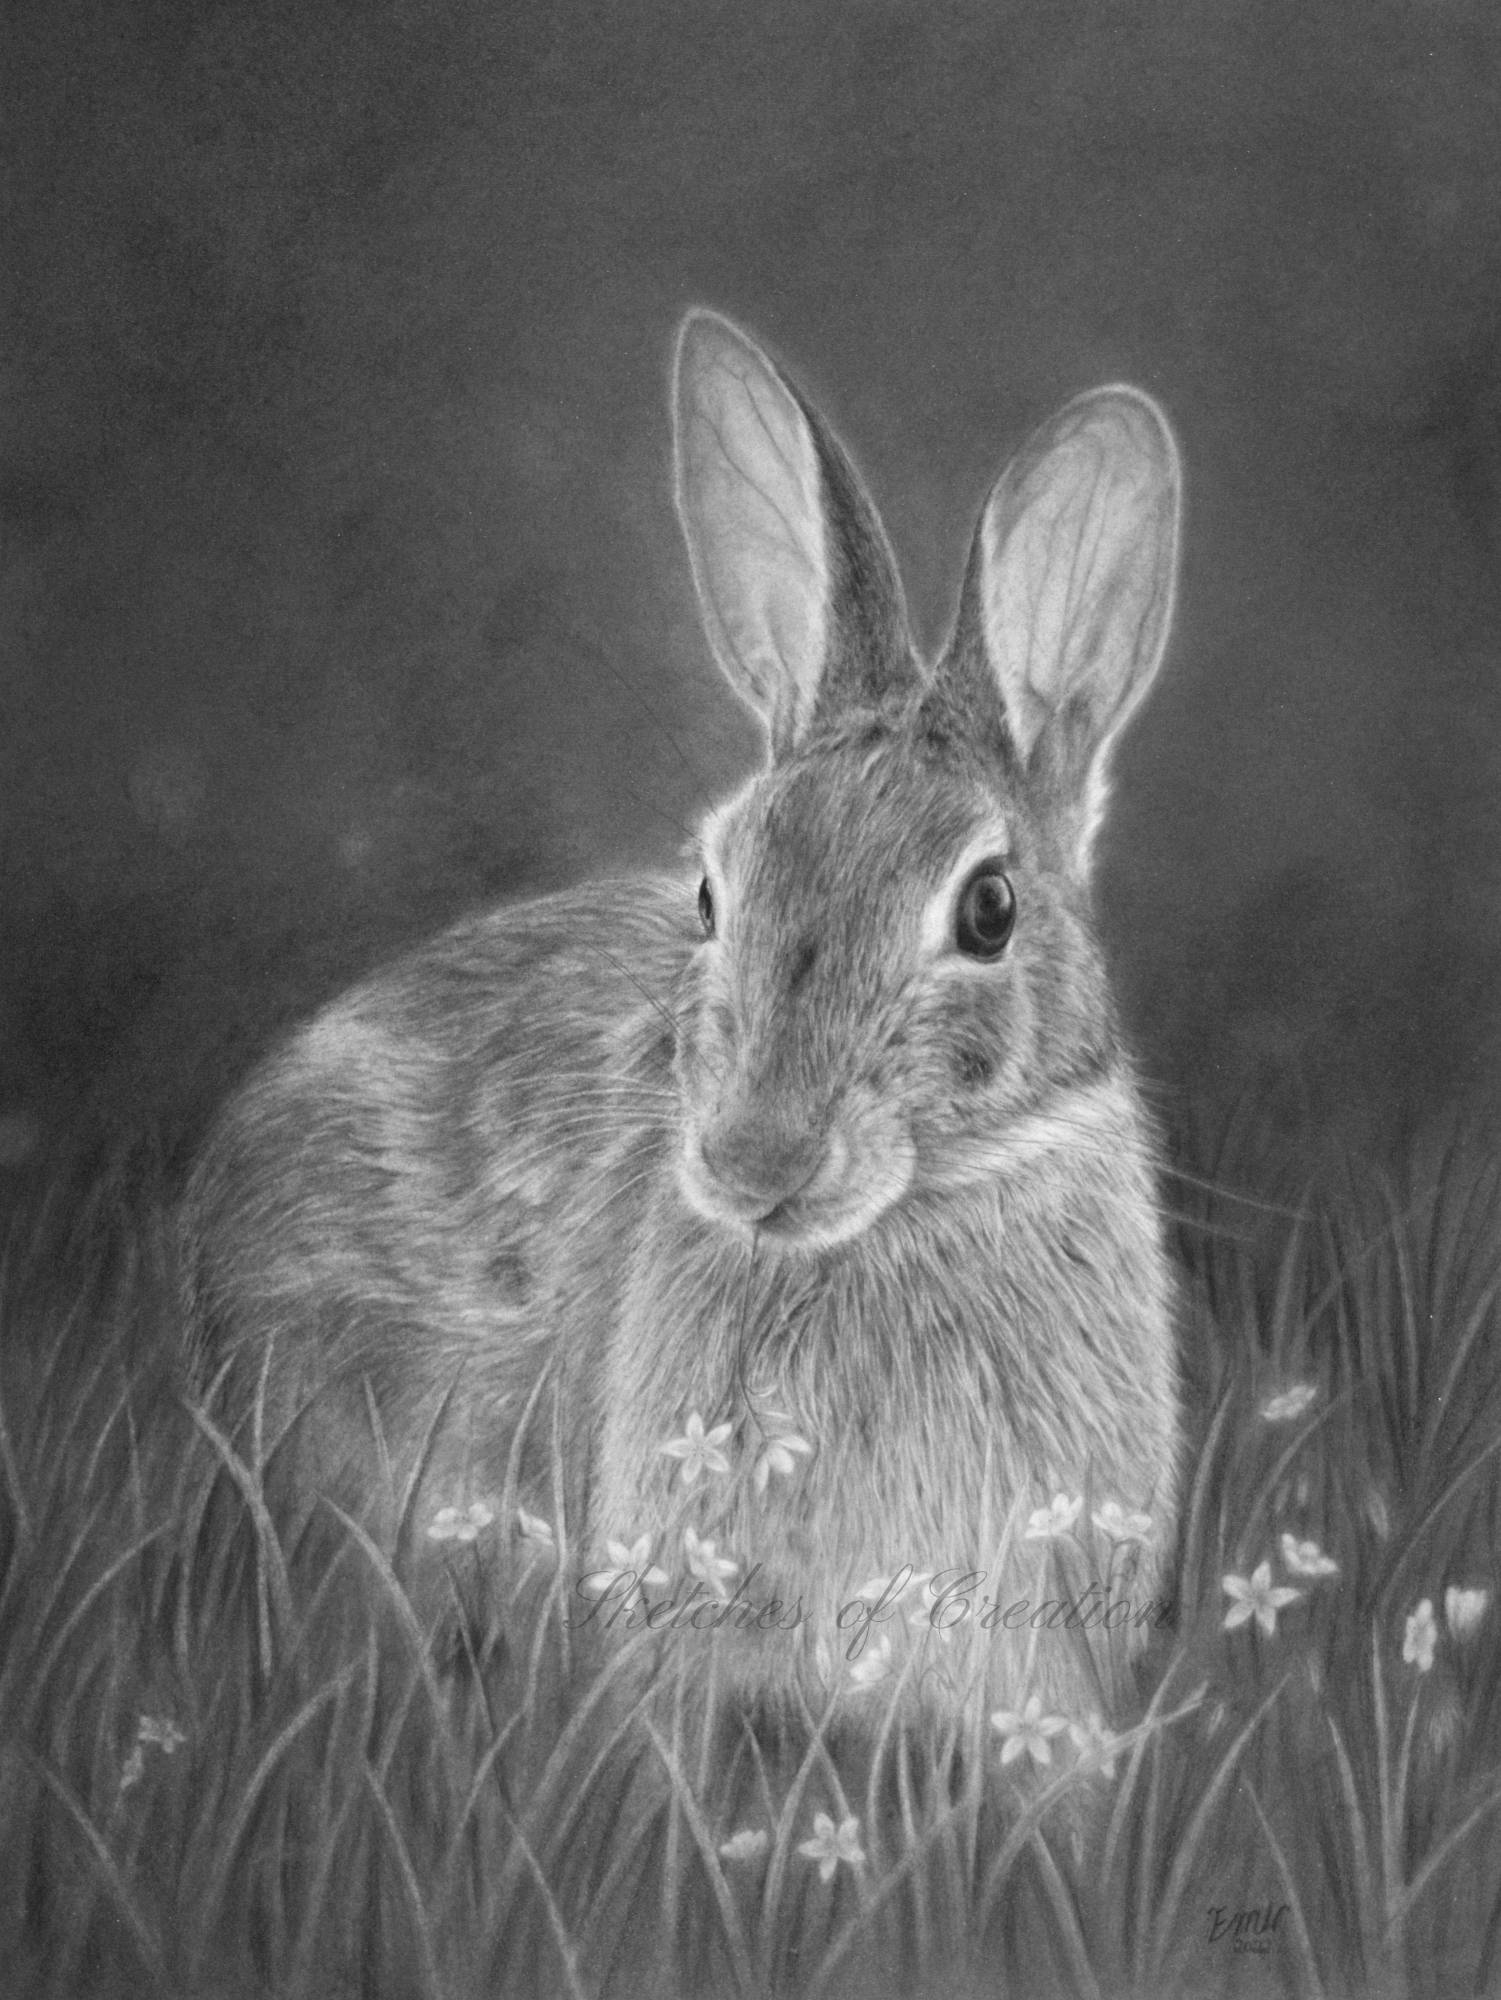 A drawing of a rabbit eating flowers